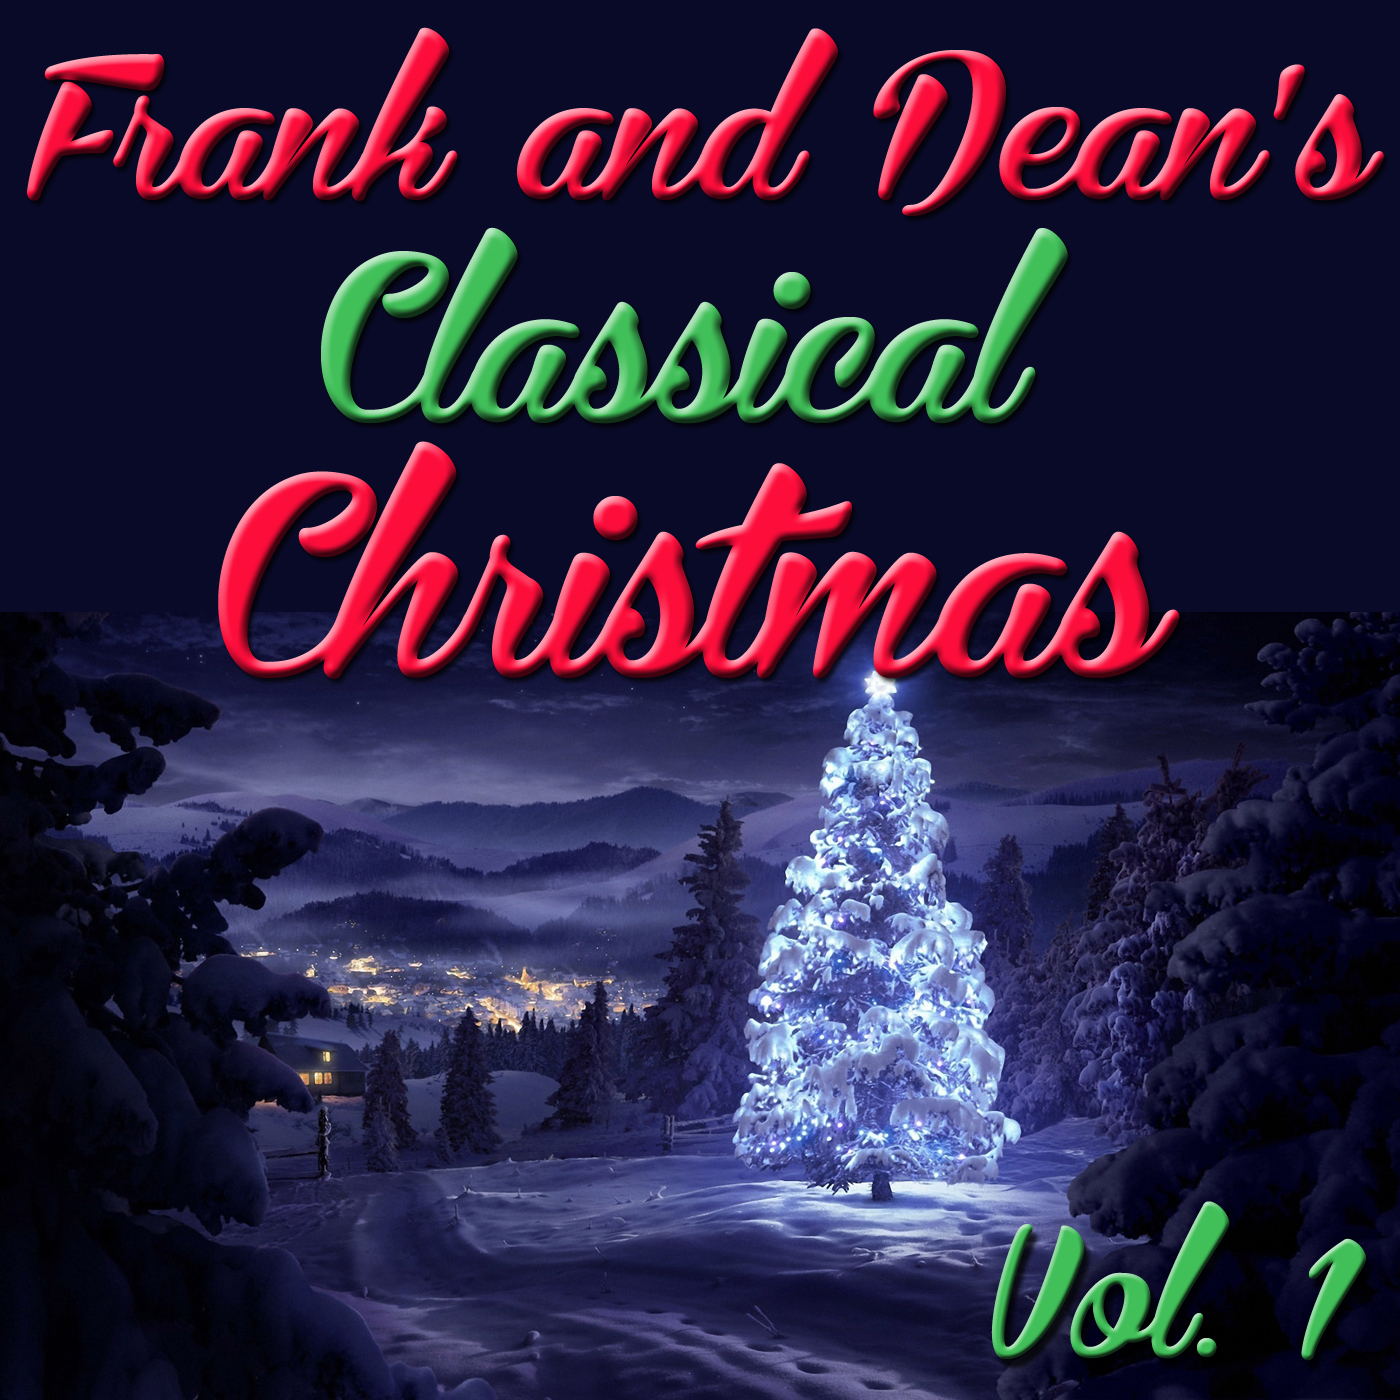 Frank and Dean's Classical Christmas, Vol. 1